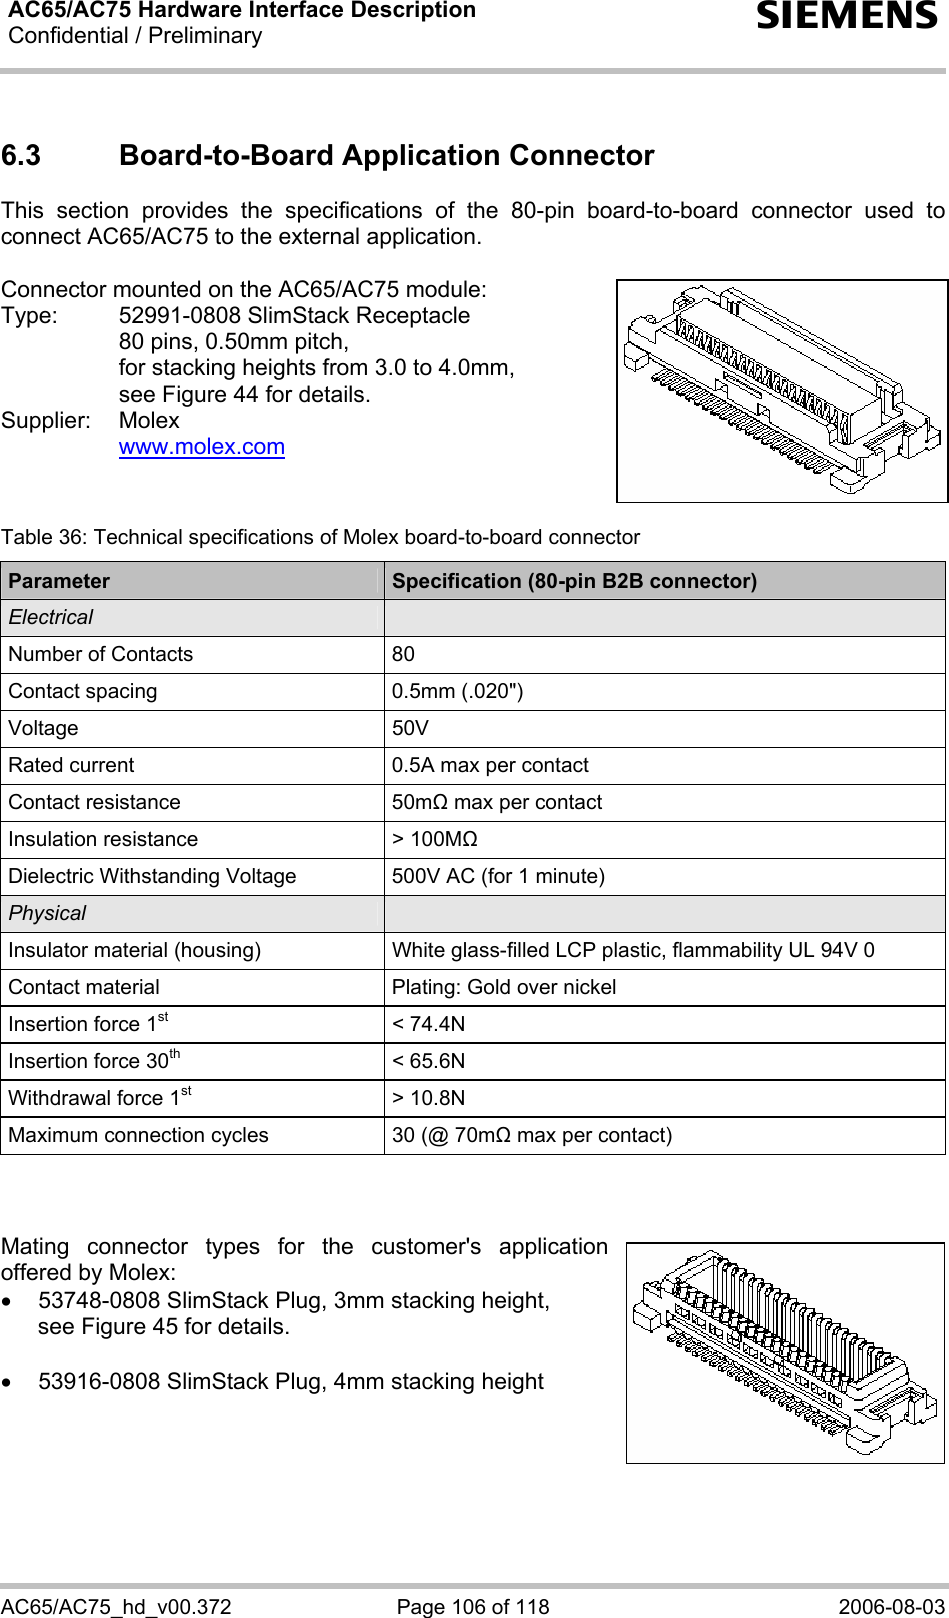 AC65/AC75 Hardware Interface Description Confidential / Preliminary  s AC65/AC75_hd_v00.372  Page 106 of 118  2006-08-03 6.3  Board-to-Board Application Connector This section provides the specifications of the 80-pin board-to-board connector used to connect AC65/AC75 to the external application.   Connector mounted on the AC65/AC75 module: Type:  52991-0808 SlimStack Receptacle    80 pins, 0.50mm pitch,   for stacking heights from 3.0 to 4.0mm,   see Figure 44 for details. Supplier: Molex   www.molex.com    Table 36: Technical specifications of Molex board-to-board connector Parameter  Specification (80-pin B2B connector) Electrical   Number of Contacts  80 Contact spacing  0.5mm (.020&quot;) Voltage 50V Rated current  0.5A max per contact Contact resistance  50m max per contact Insulation resistance  &gt; 100M Dielectric Withstanding Voltage  500V AC (for 1 minute) Physical   Insulator material (housing)  White glass-filled LCP plastic, flammability UL 94V 0 Contact material  Plating: Gold over nickel Insertion force 1st &lt; 74.4N Insertion force 30th &lt; 65.6N Withdrawal force 1st &gt; 10.8N Maximum connection cycles  30 (@ 70m max per contact)    Mating connector types for the customer&apos;s application offered by Molex:  •  53748-0808 SlimStack Plug, 3mm stacking height, see Figure 45 for details.  •  53916-0808 SlimStack Plug, 4mm stacking height     